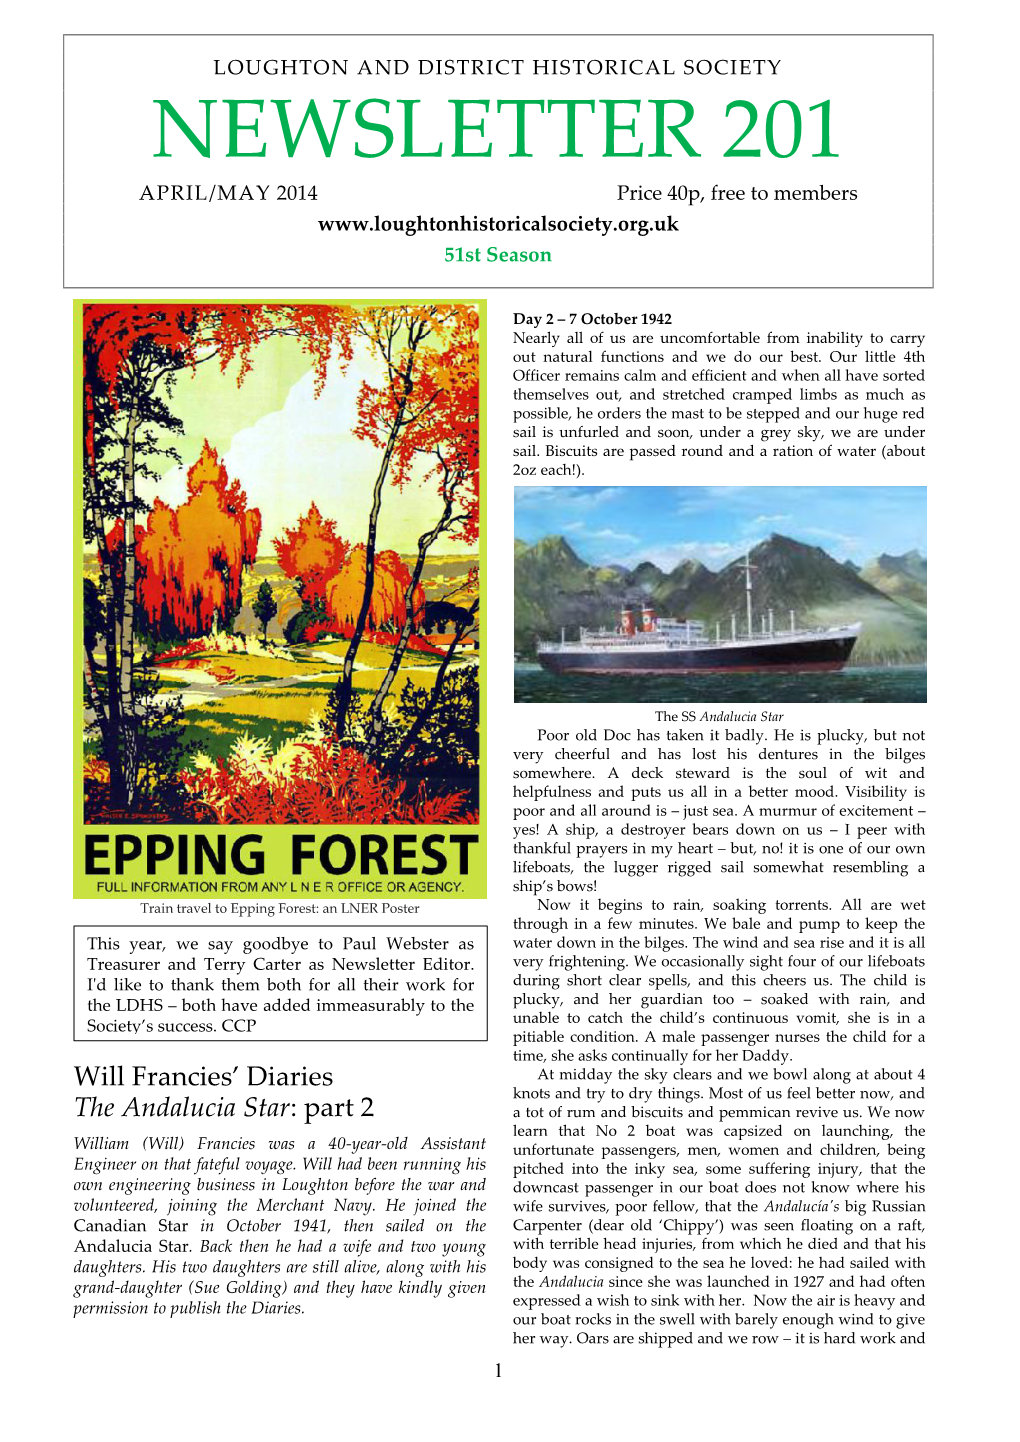 NEWSLETTER 201 APRIL/MAY 2014 Price 40P, Free to Members 51St Season